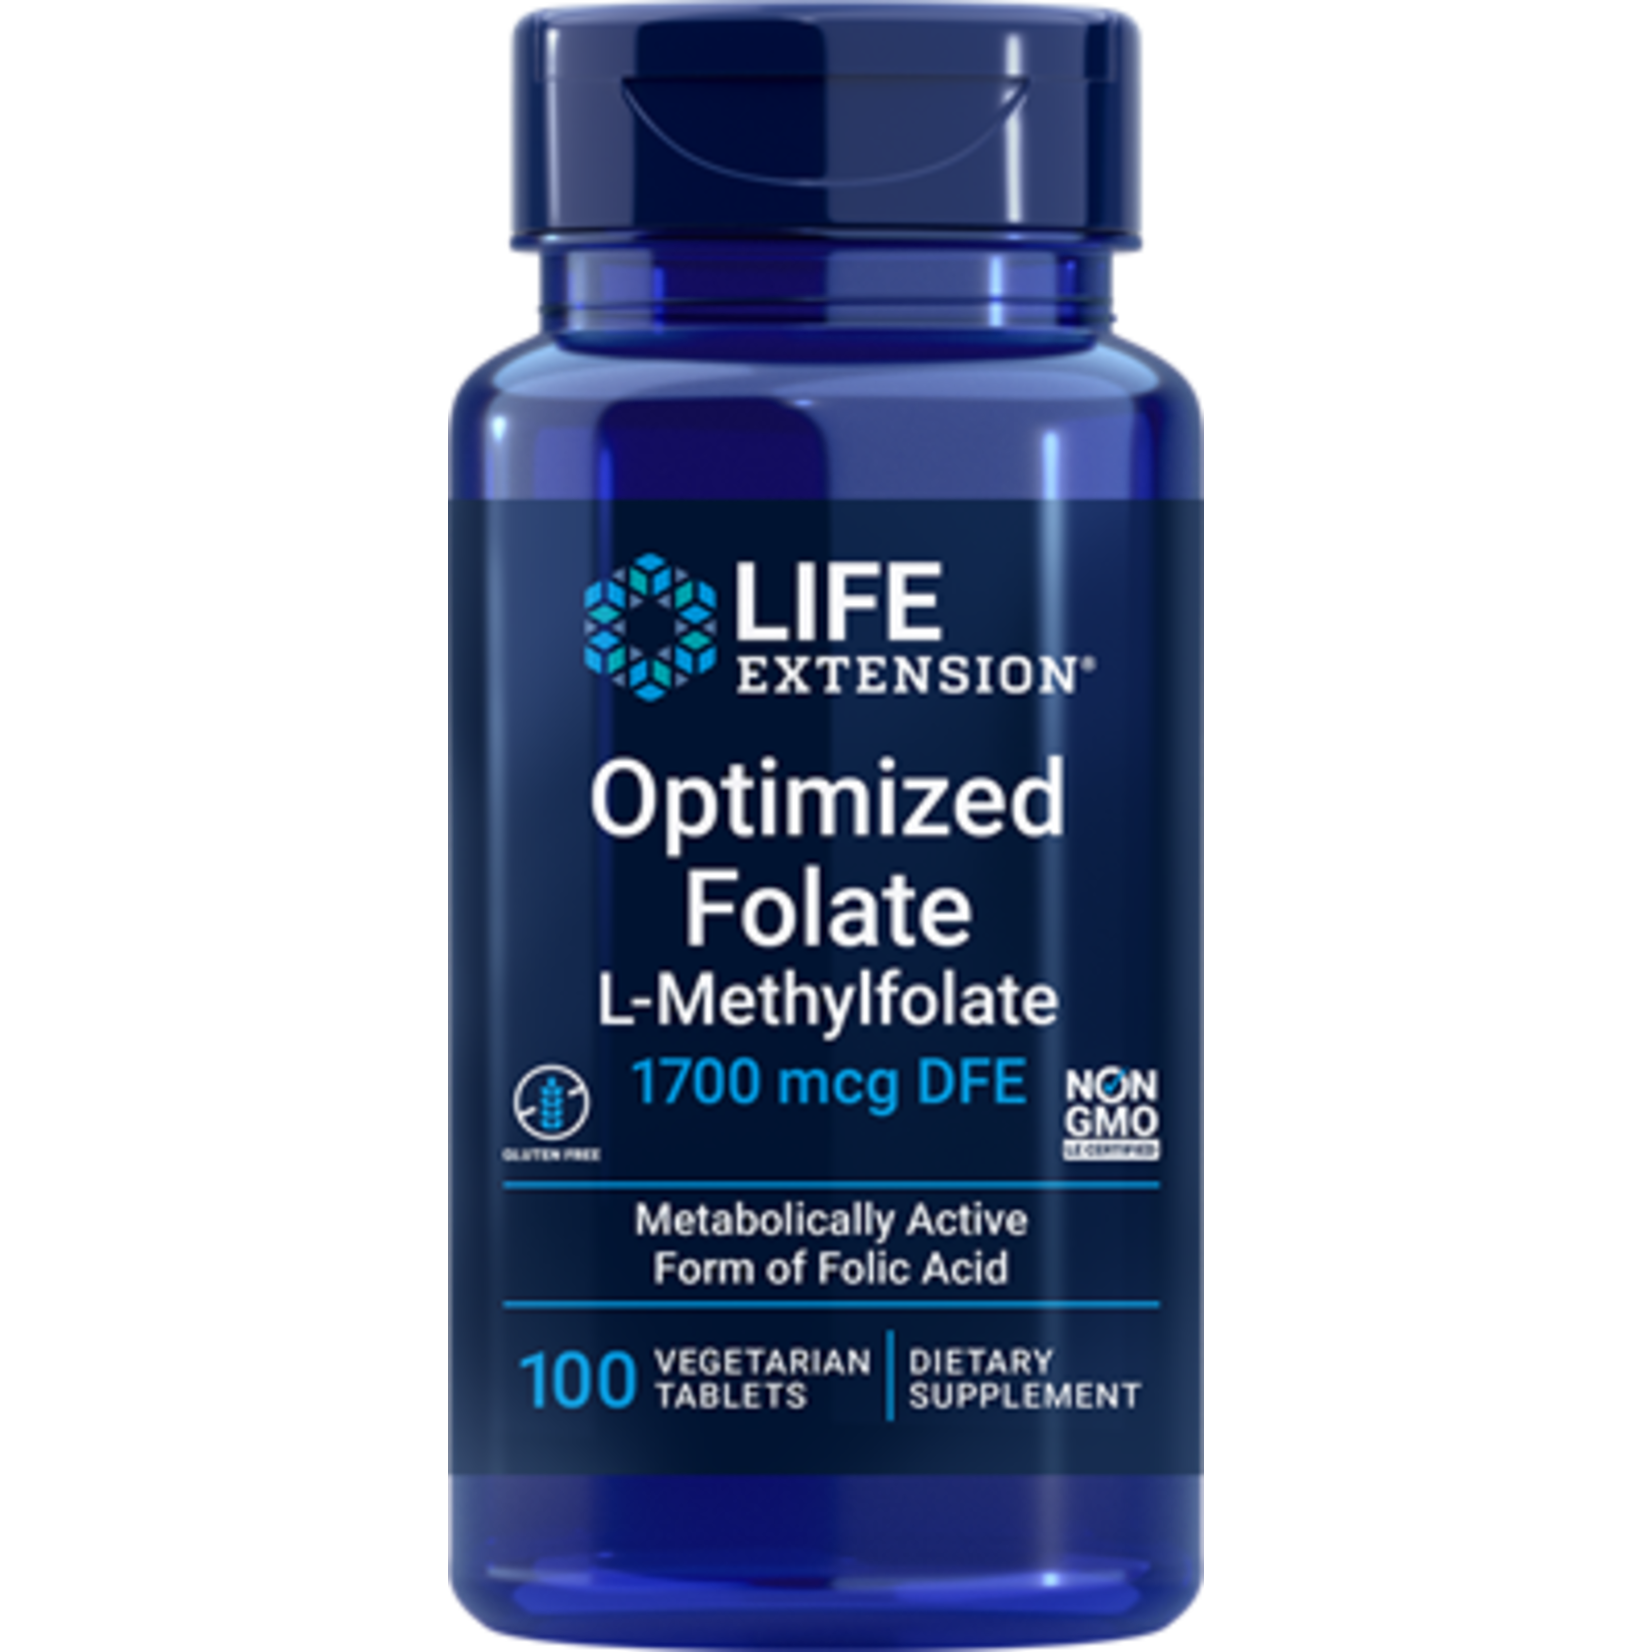 Life Extension Life Extension - Optimized Folate 1700 mcg - 100 Tablets